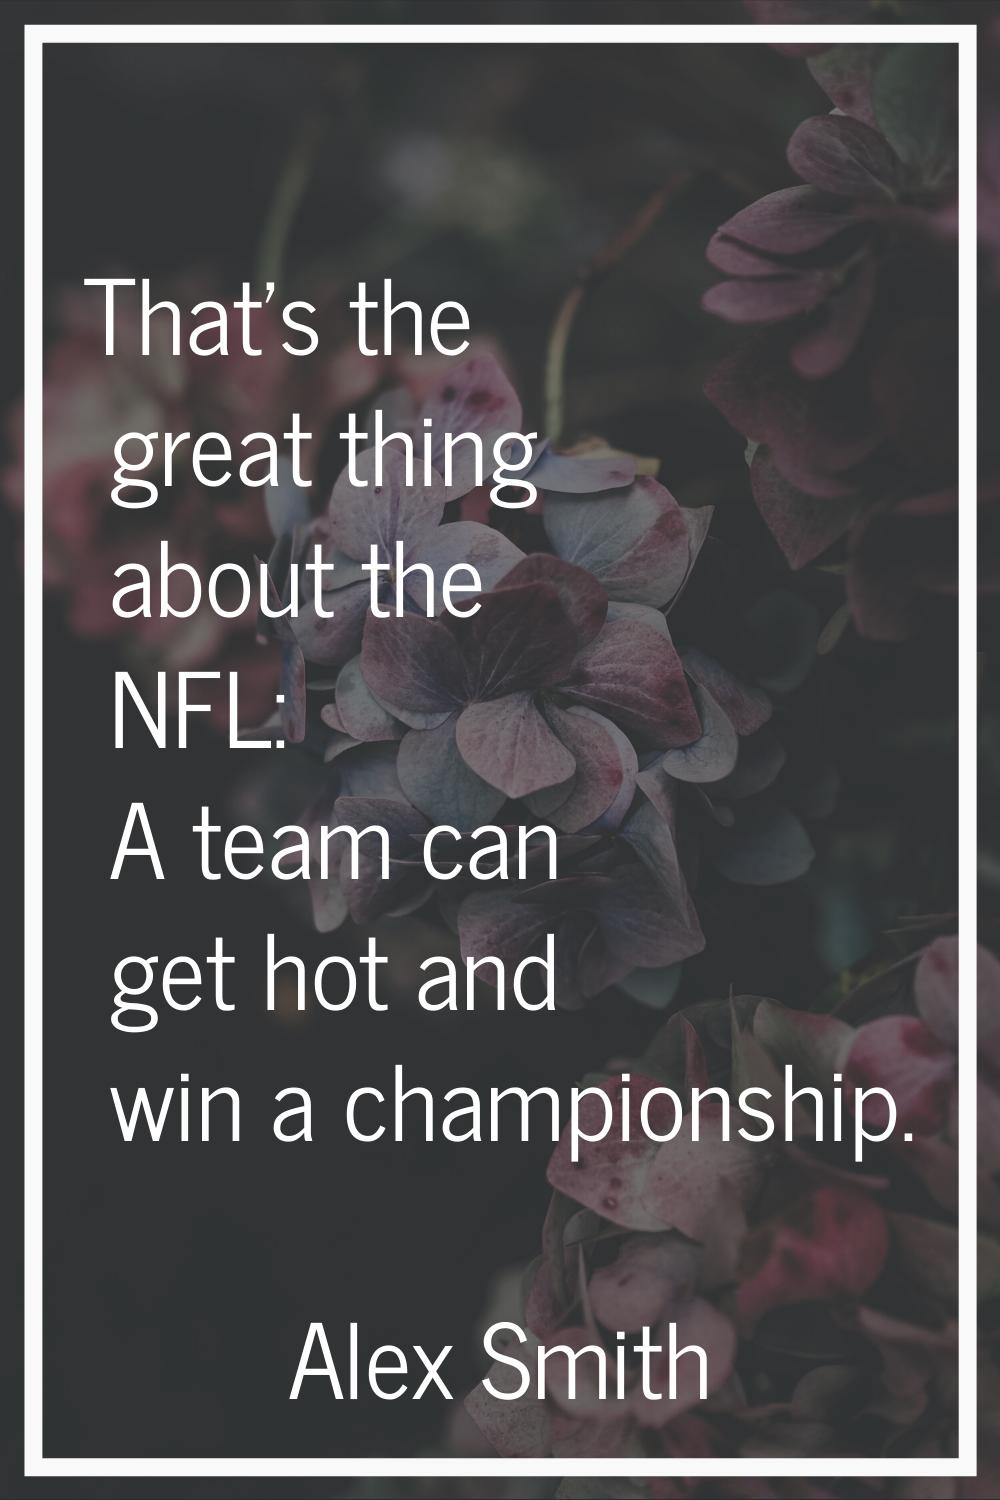 That's the great thing about the NFL: A team can get hot and win a championship.